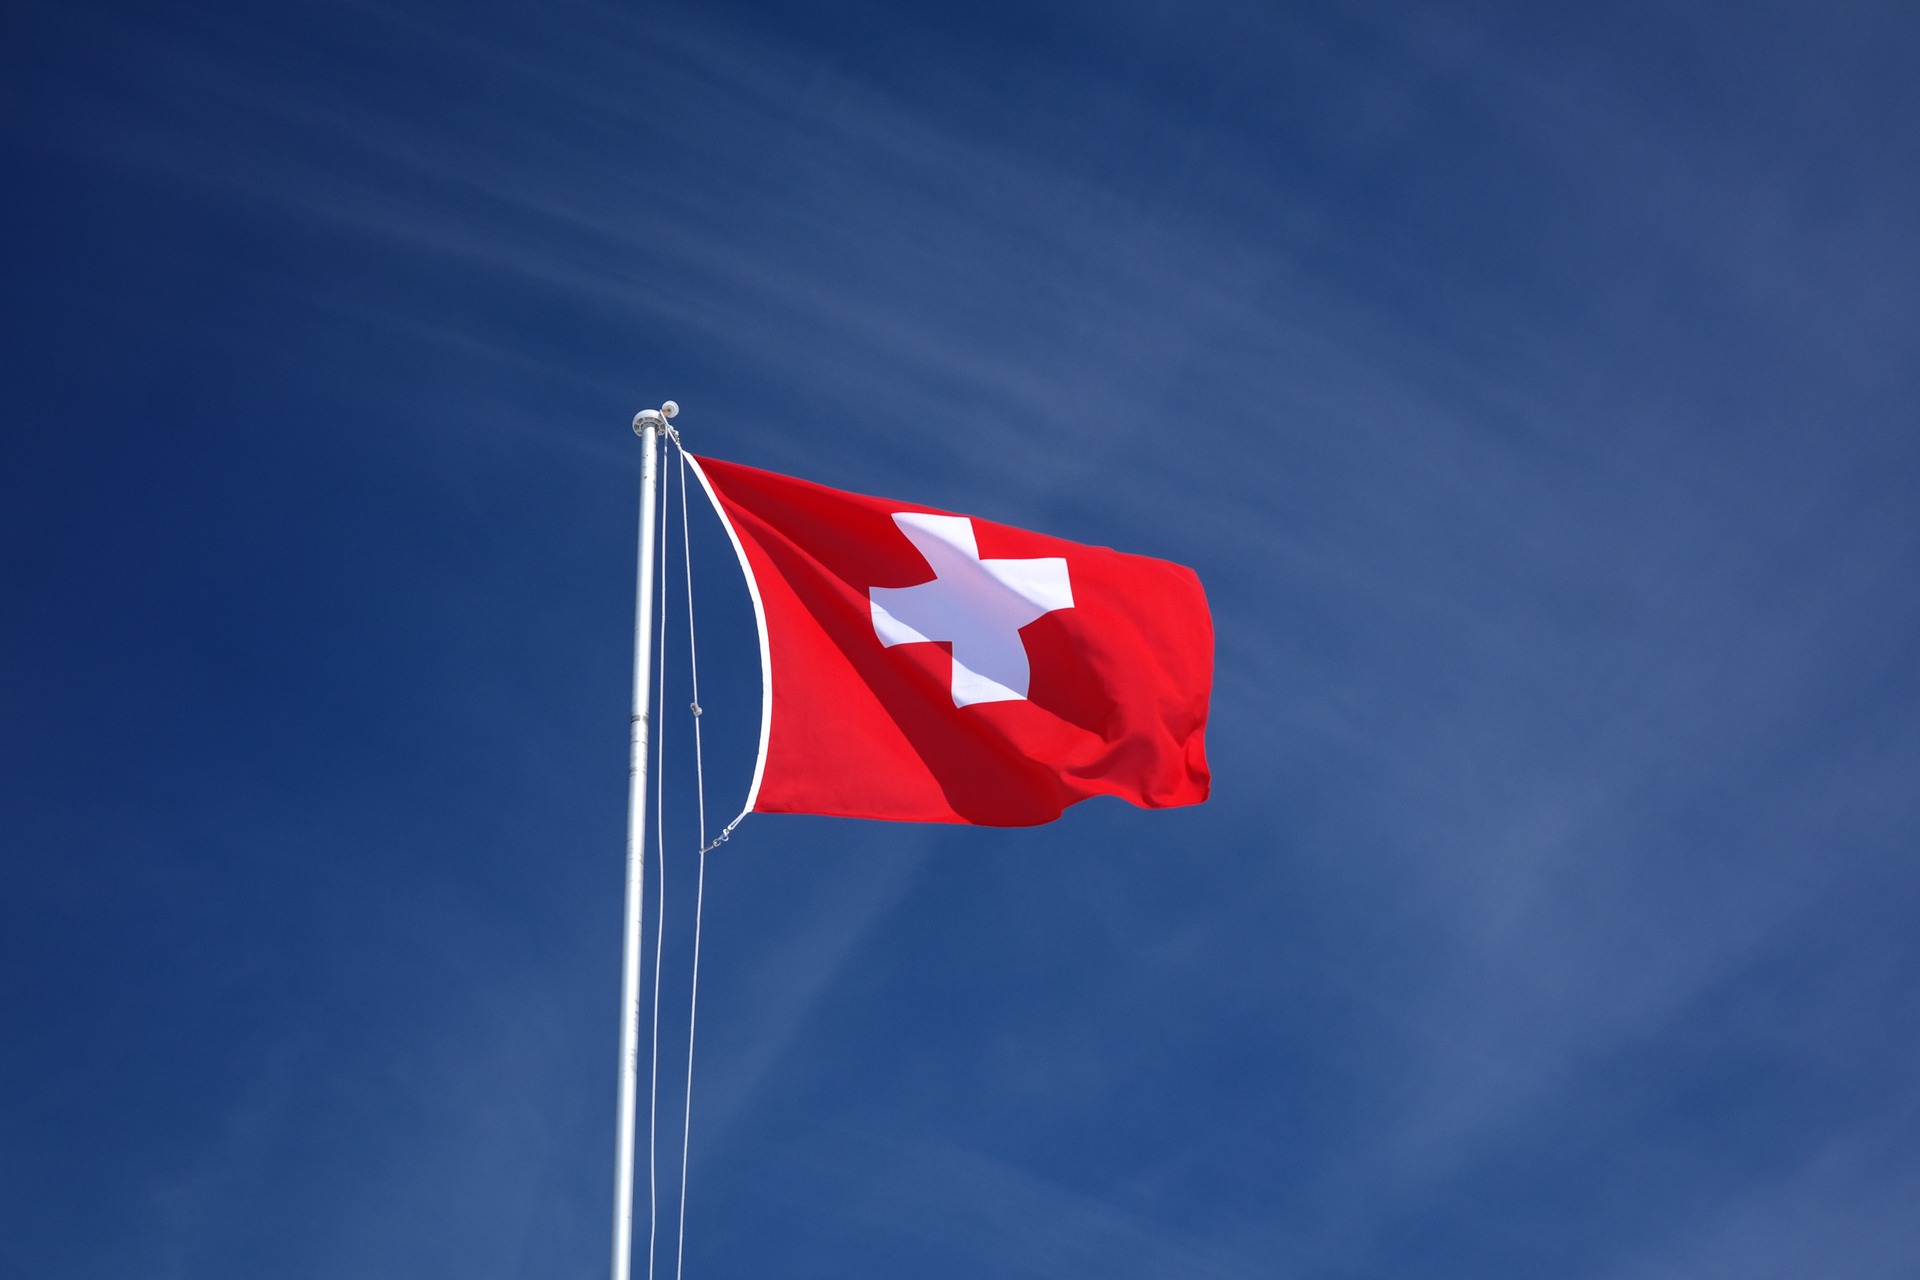 Sale of Cannabis with up to 1% THC Legal in Switzerland